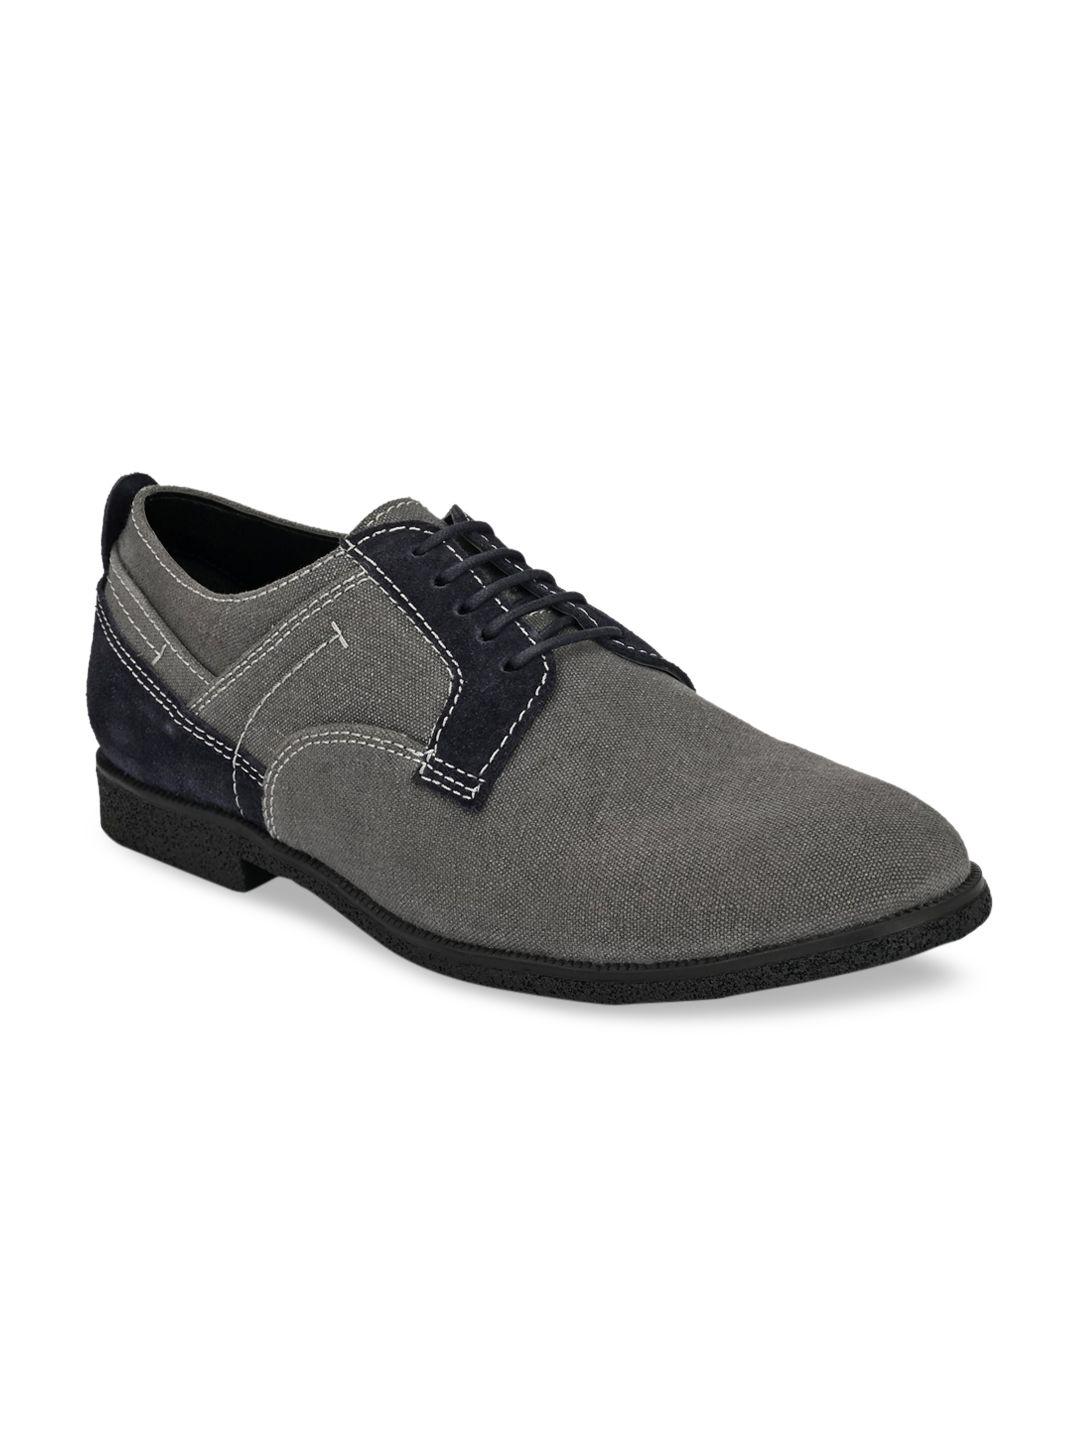 carlo romano by wasan shoes men grey genuine leather formal shoe